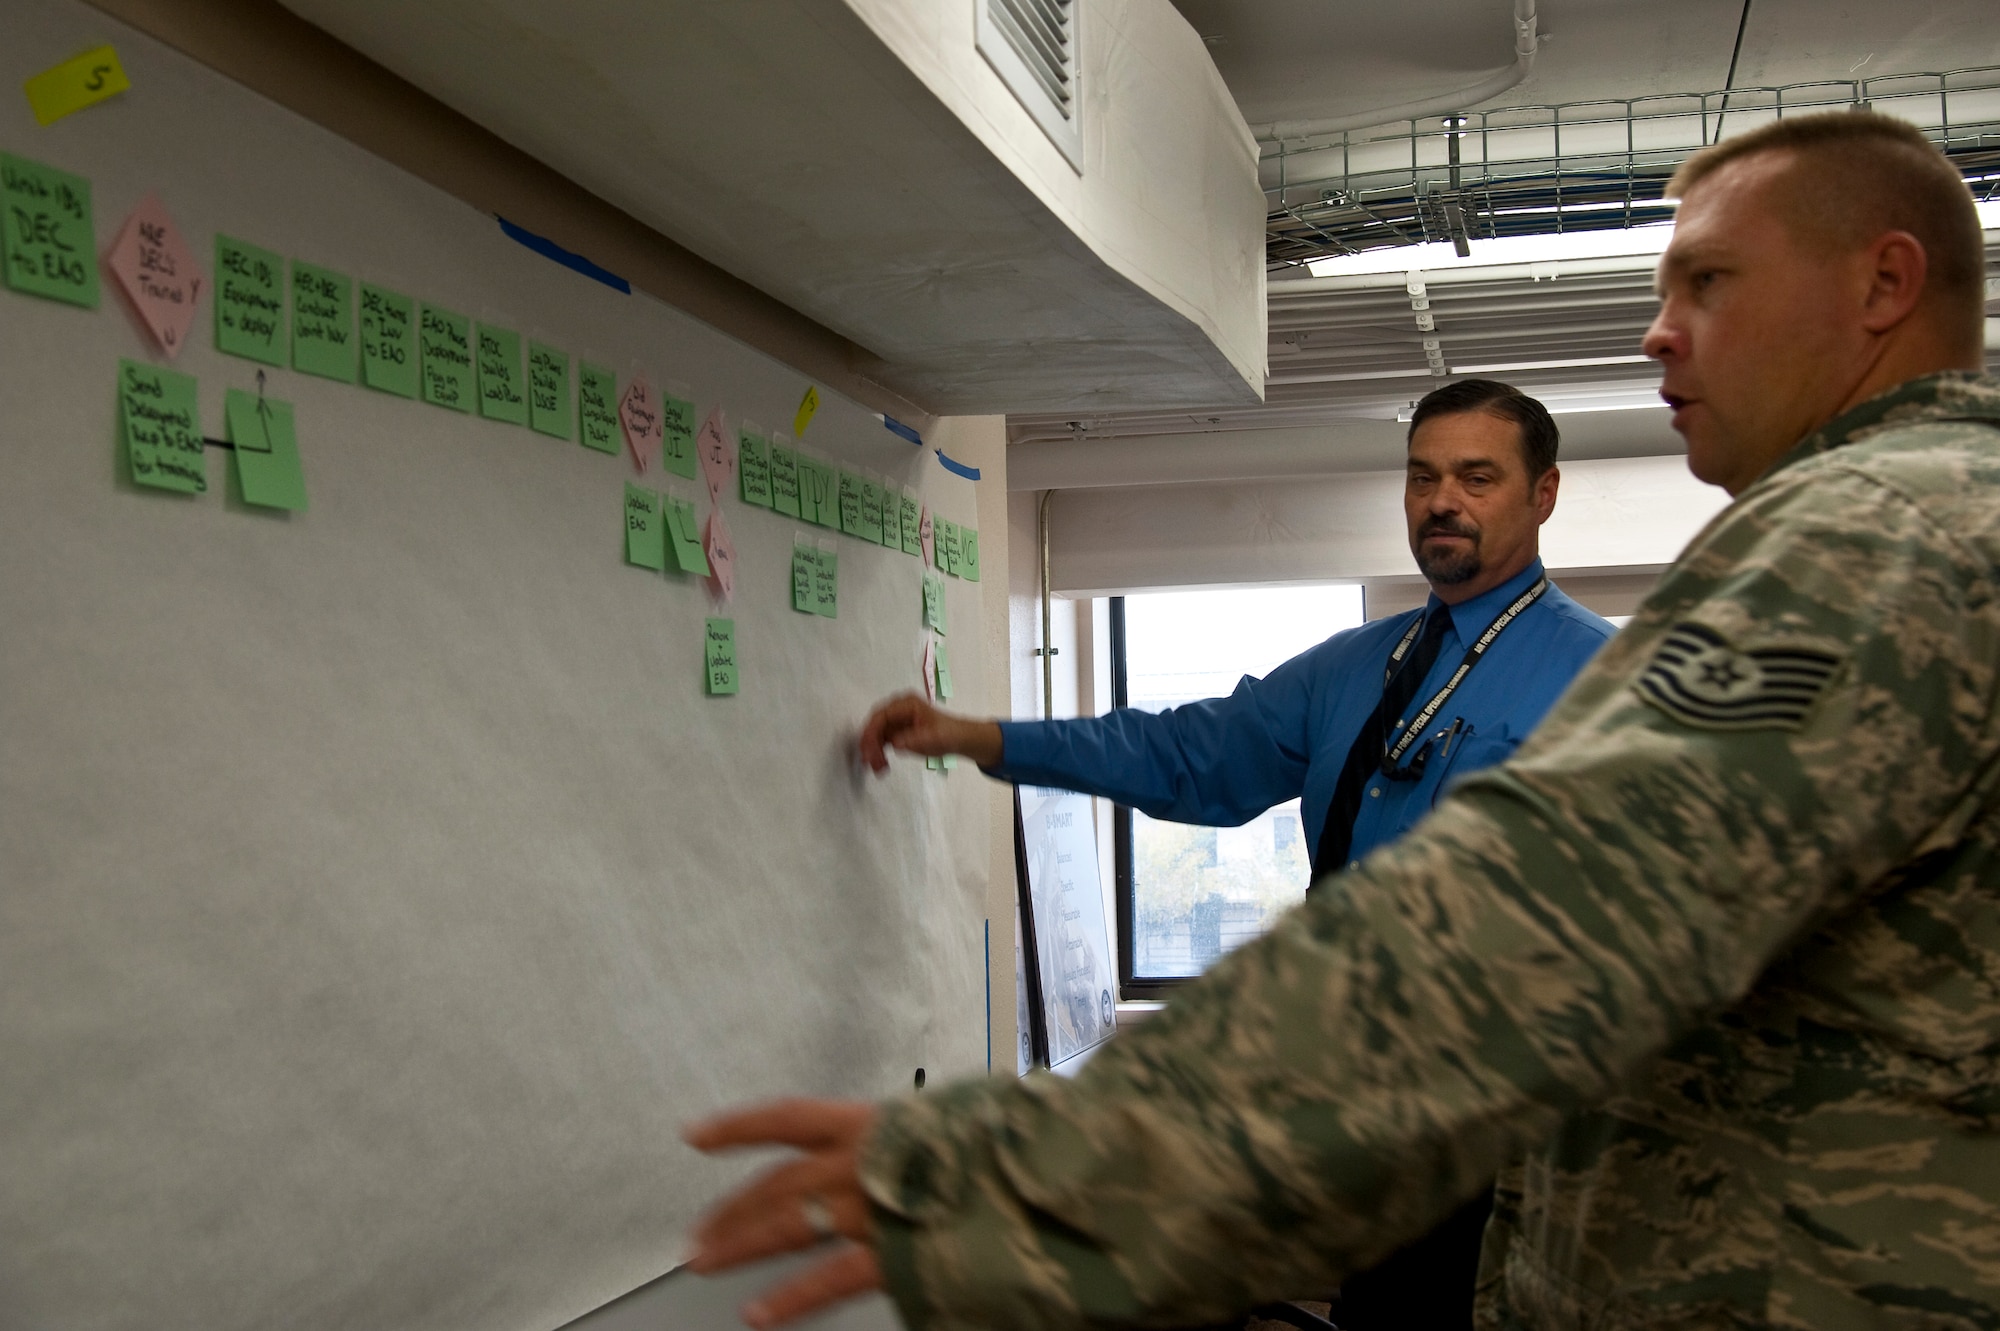 Virgil Poulsen, Air Force Special Operations Command Air Force Smart Operations for the 21st Century black belt, explains a value stream map to Tech. Sgt. Cody Covert, 901st Special Operations Aircraft Maintenance Squadron and AFSO21 green belt trainee, during an AFSO21 event at Hurlburt Field, Fla., Dec. 5, 2013. Conducting an AFSO21 event allows units to see their processes so they can maximize efficiency. (U.S. Air Force photo/Senior Airman Michelle Vickers)